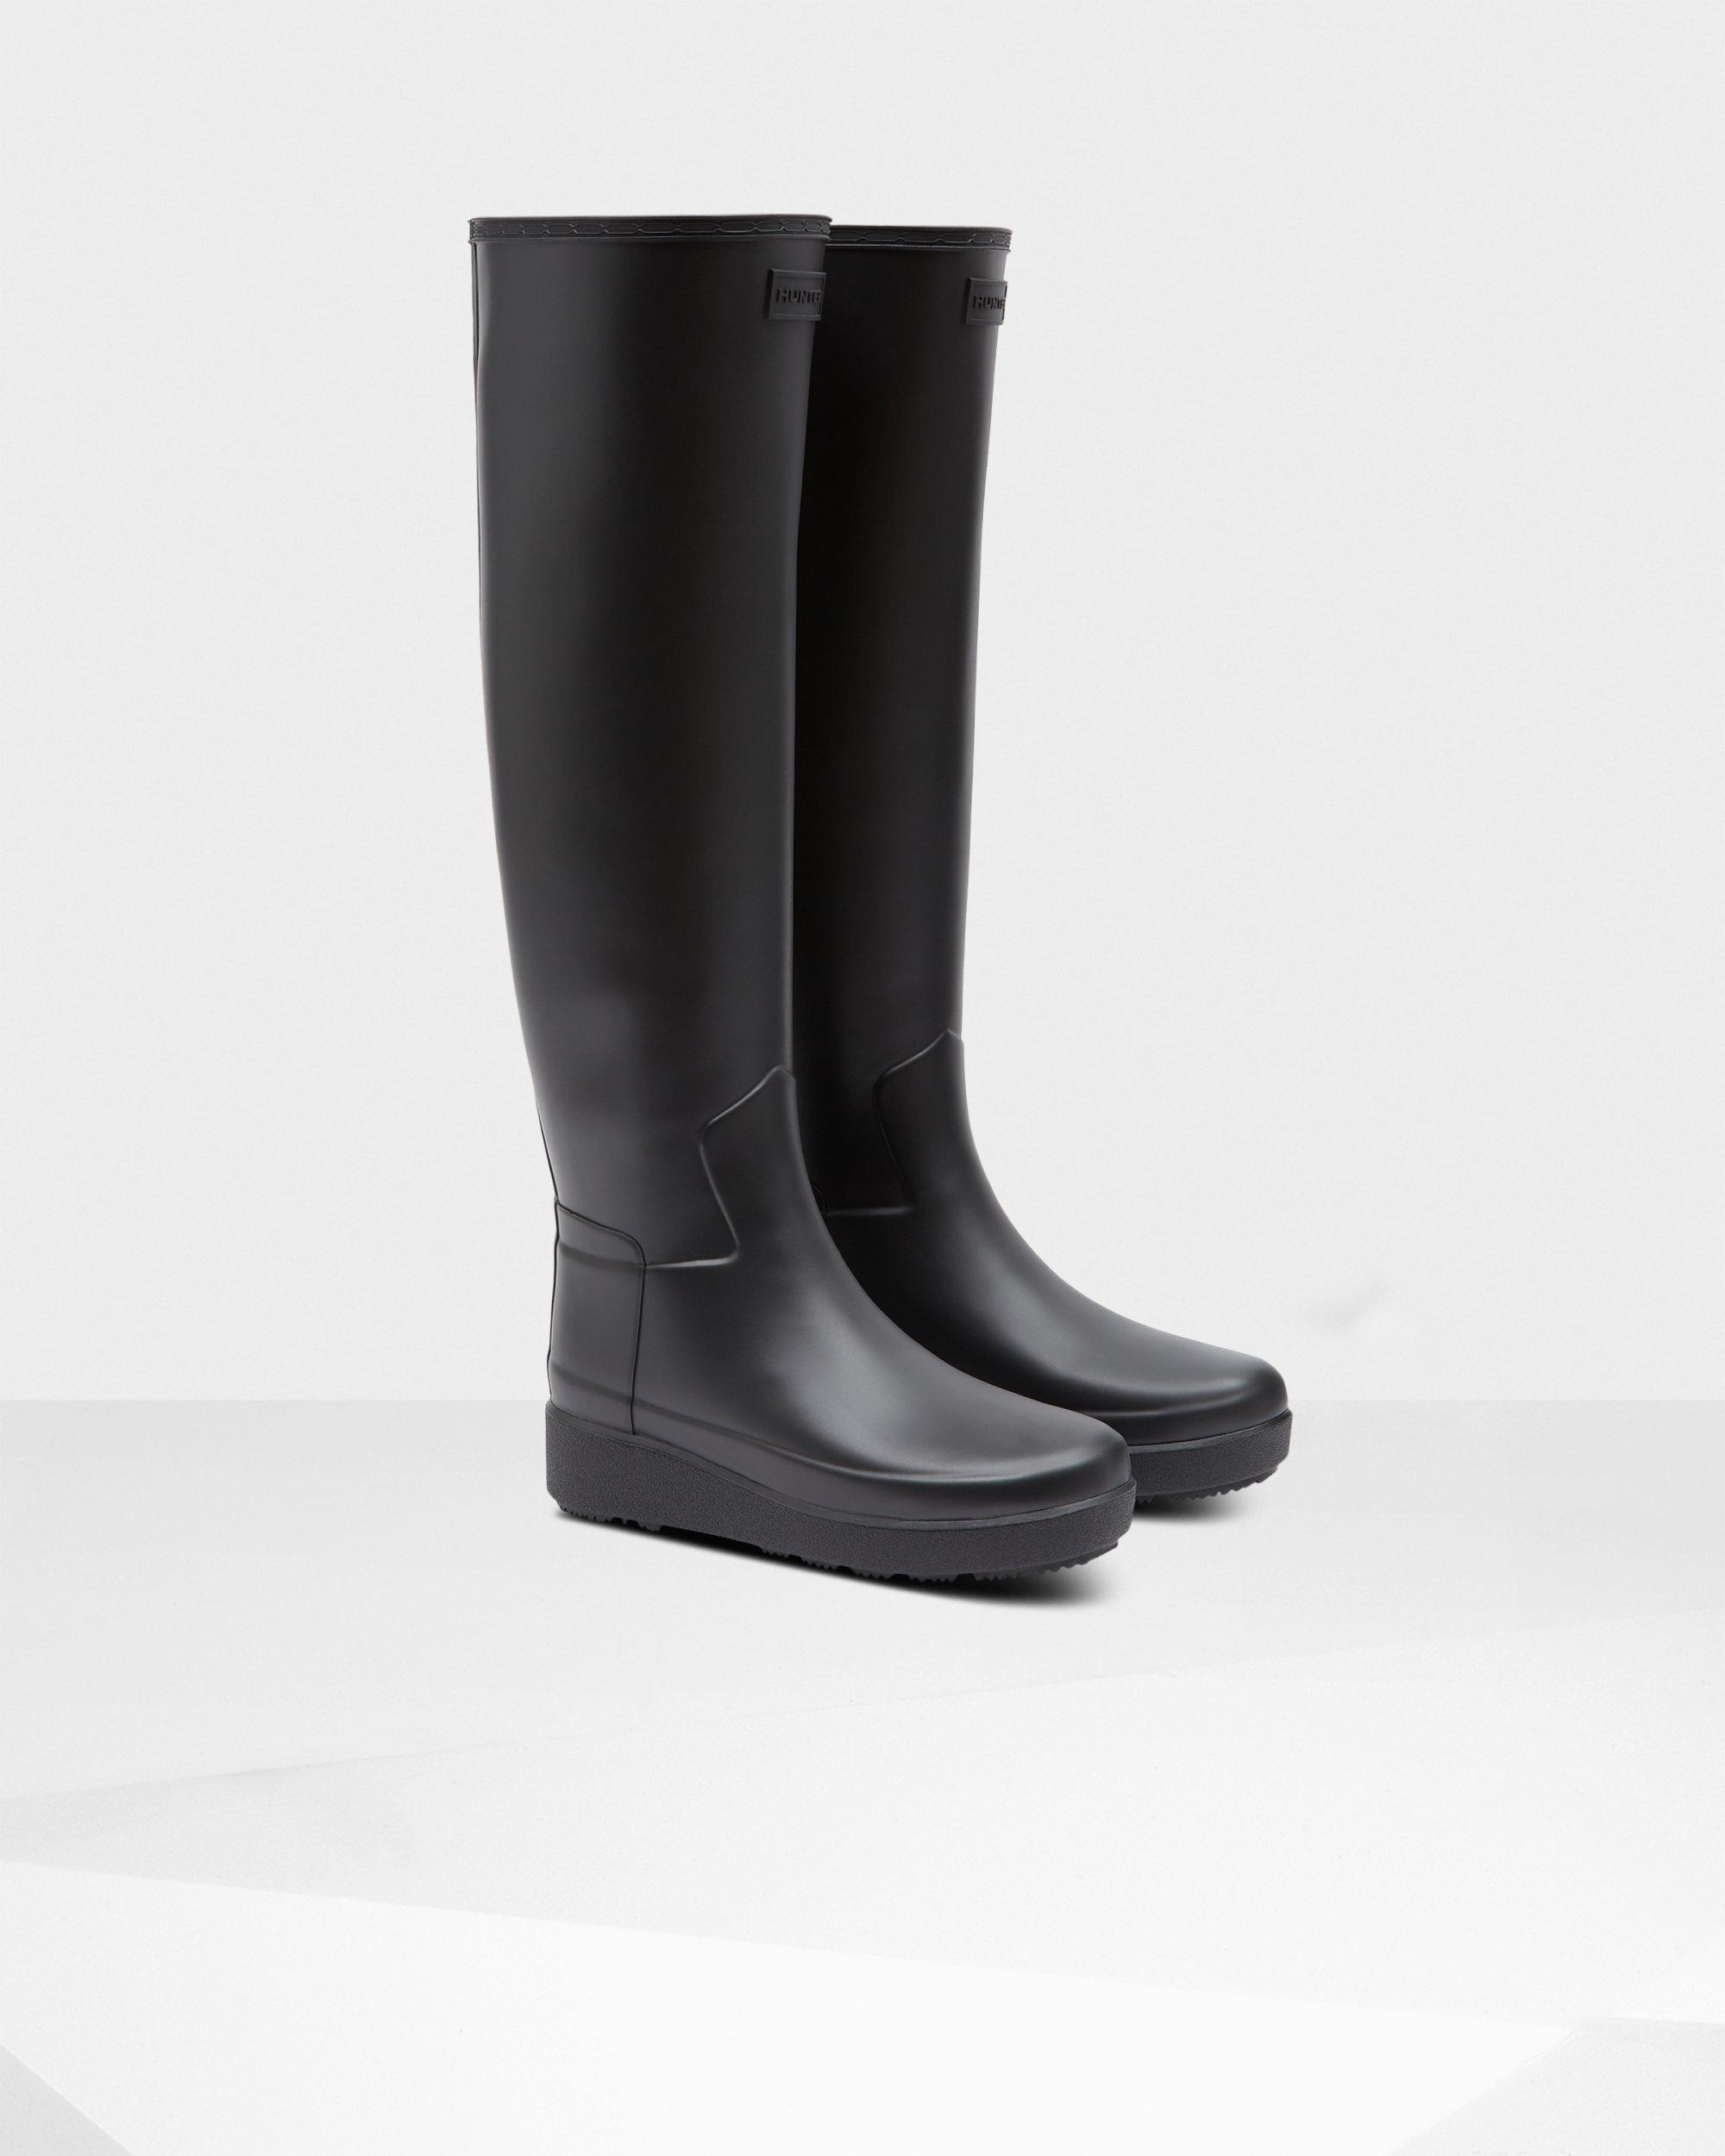 HUNTER Rubber Refined Slim Fit Creeper Knee-high Boots in Black - Lyst